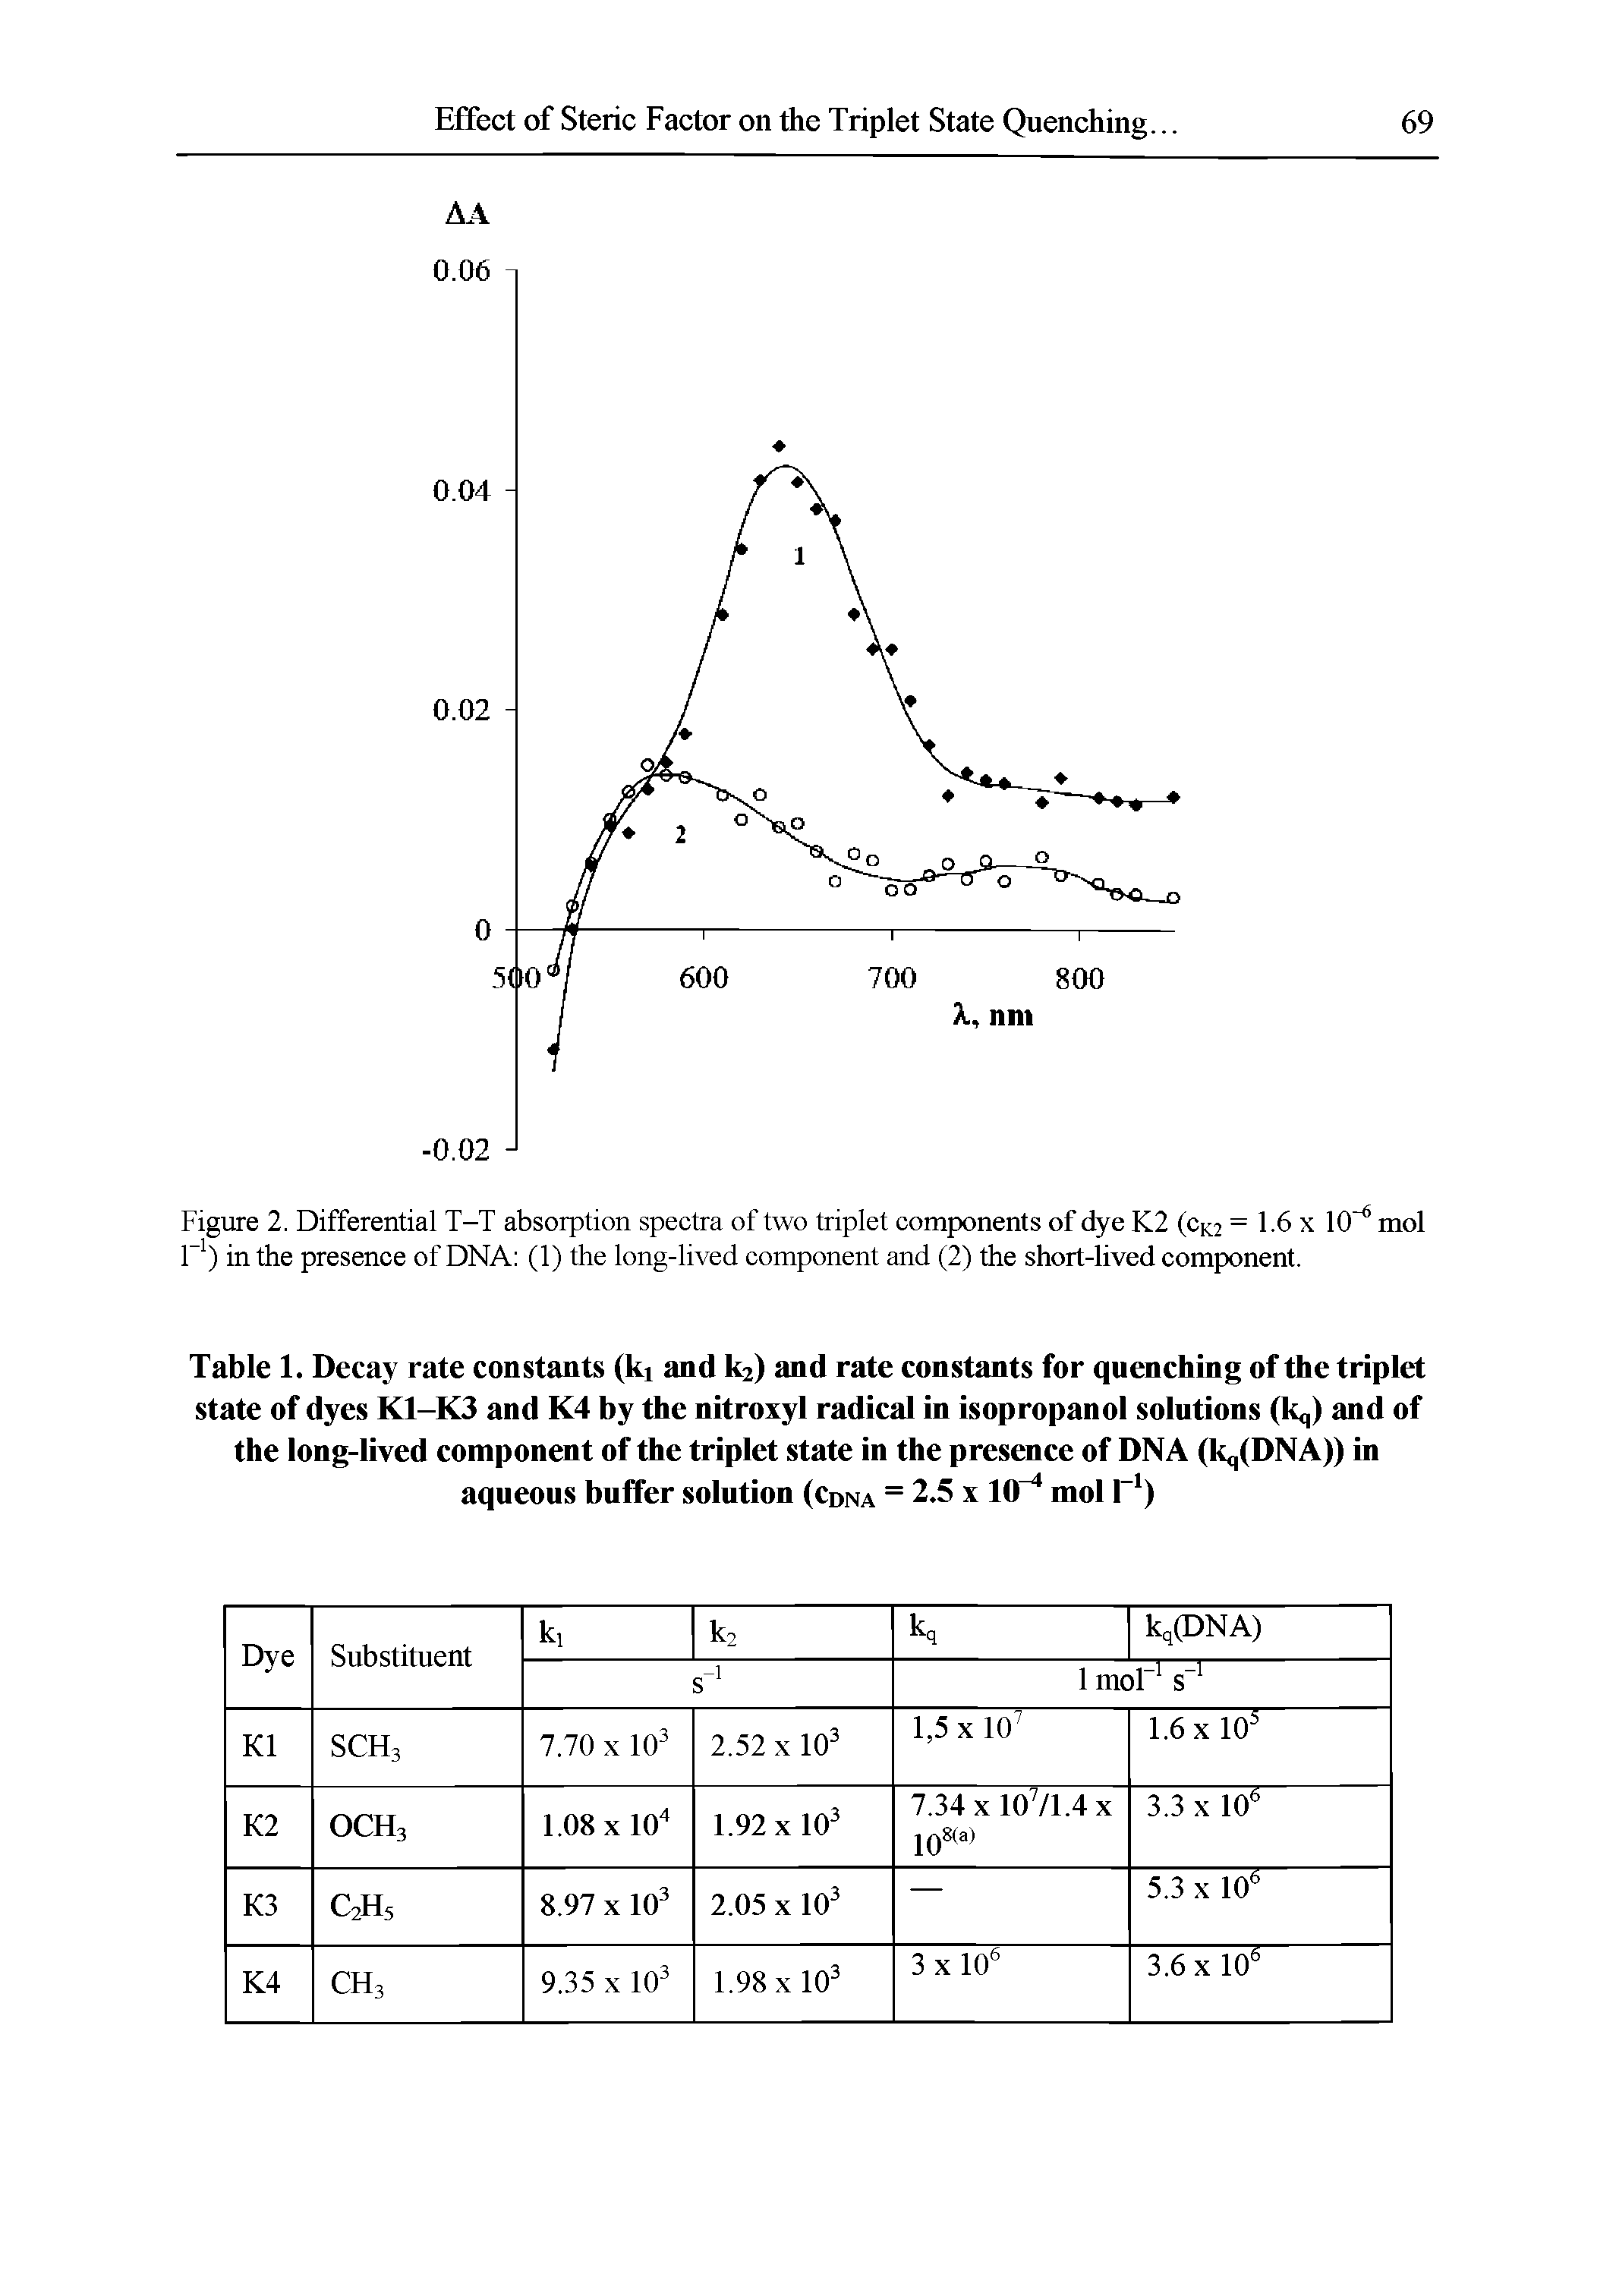 Table 1. Decay rate constants (ki and k2) and rate constants for quenching of the triplet state of dyes K1-K3 and K4 by the nitroxyl radical in isopropanol solutions (kq) and of the long-lived component of the triplet state in the presence of DNA (kq(DNA)) in aqueous buffer solution (cdna = 2.5 x 10 mol 1 )...